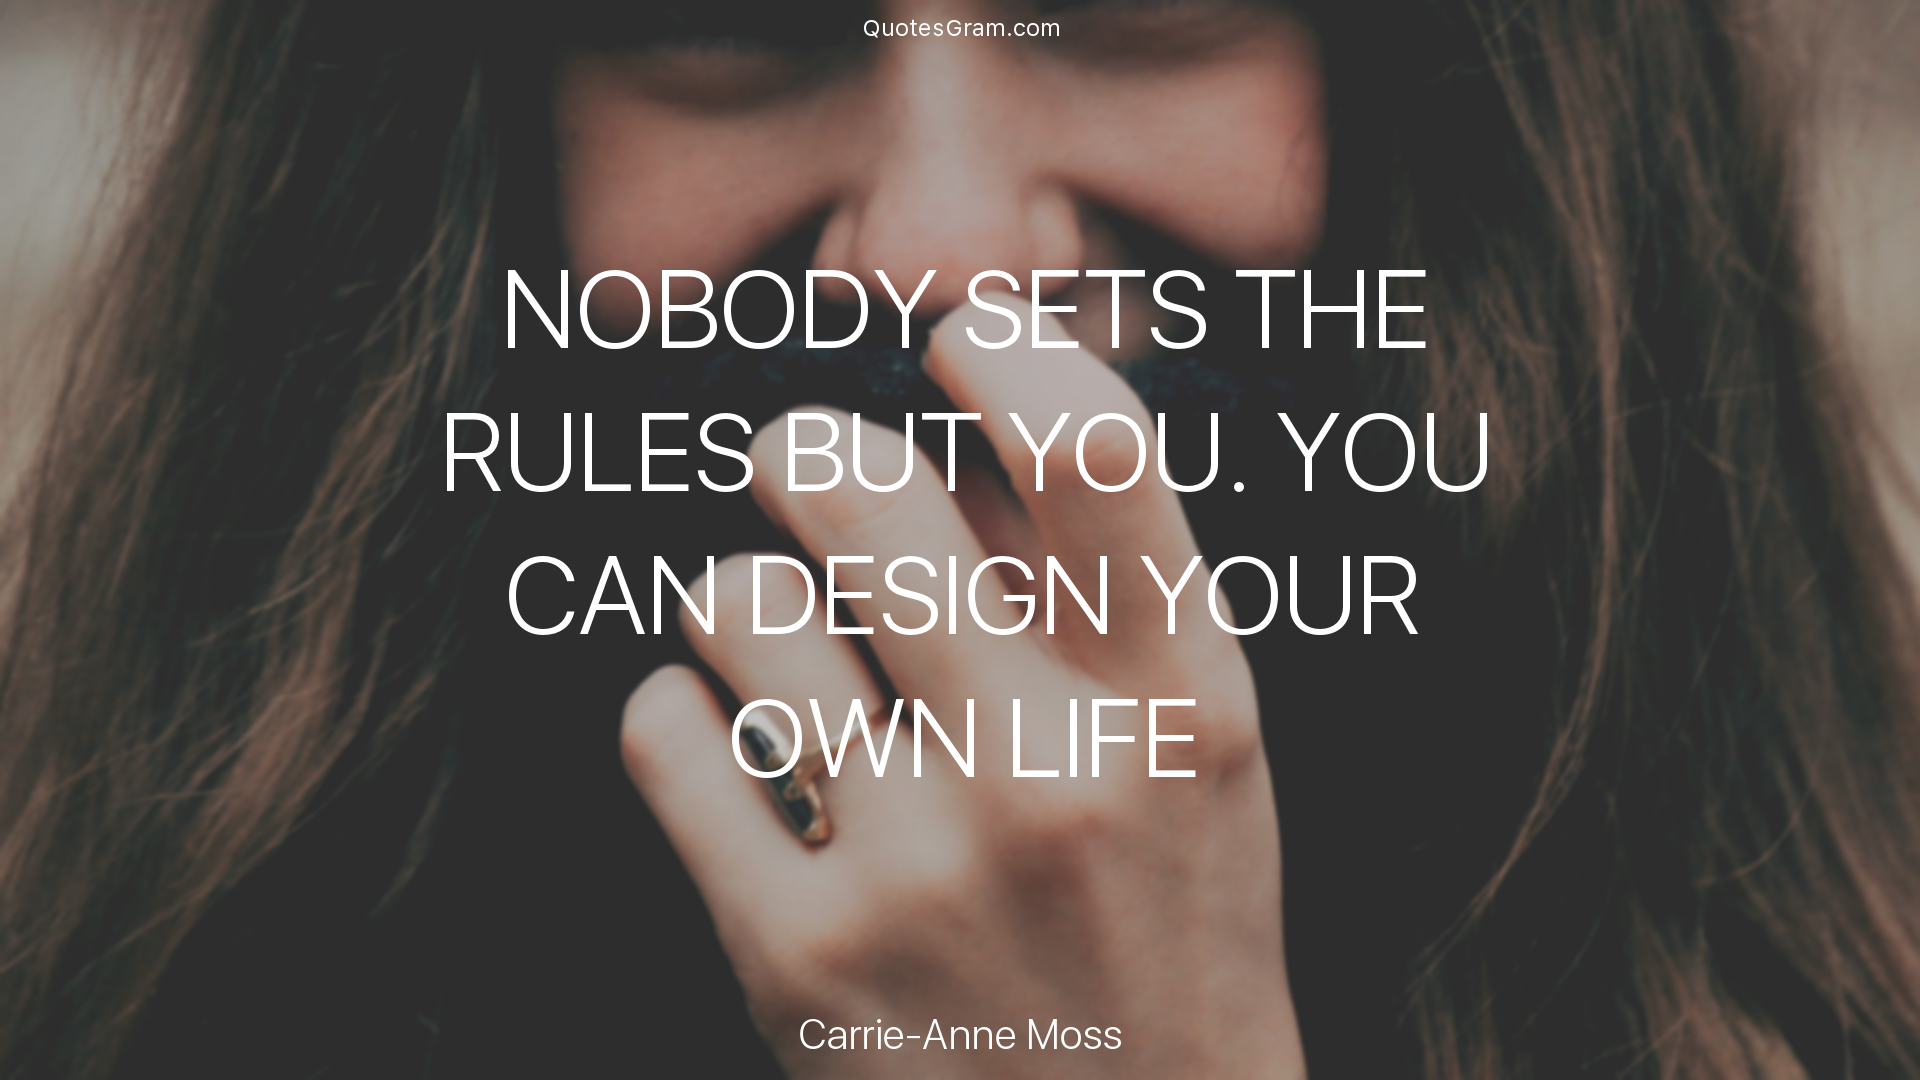 carrie-anne-moss-quote-nobody-sets-the-rules-but-you-you-can-design-4.png